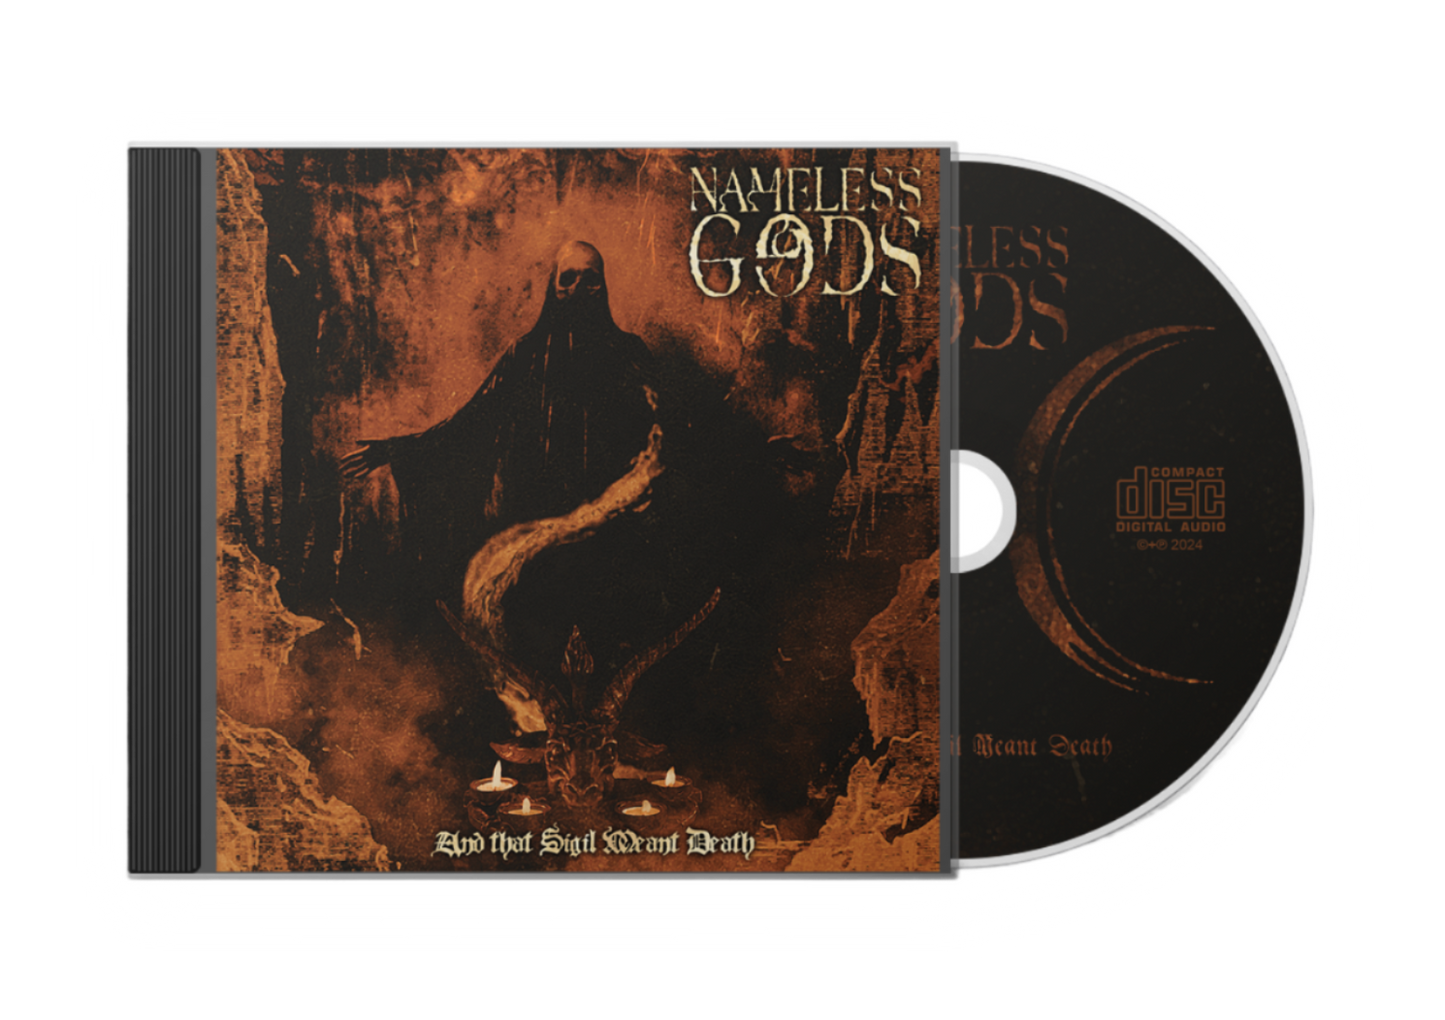 NAMELESS GODS And That Sigil Meant Death CD